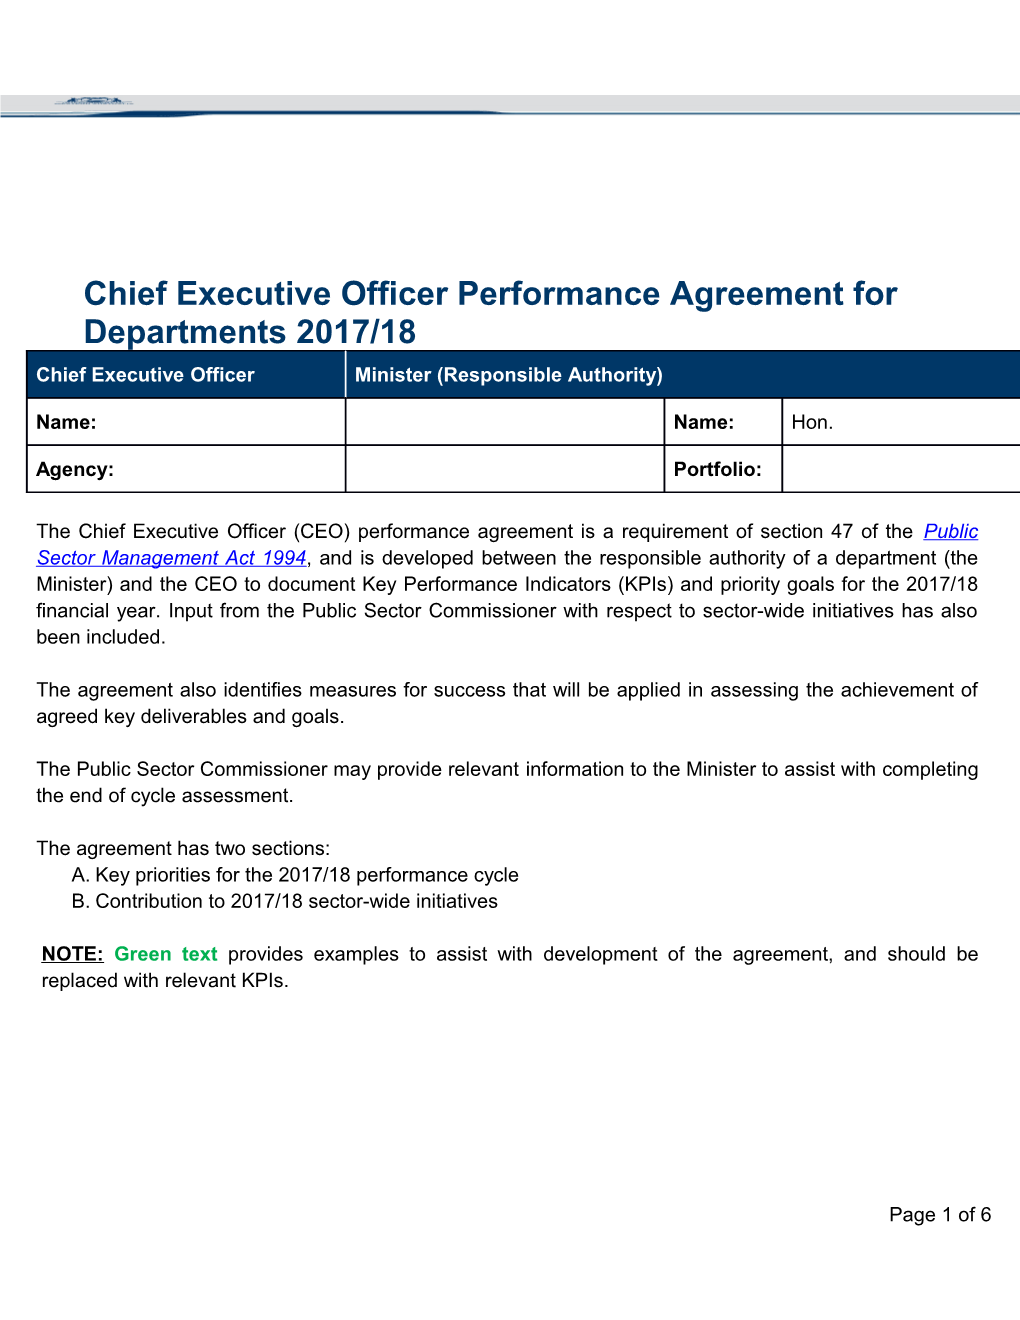 Chief Executive Officer Performance Agreement for Departments 2017/18